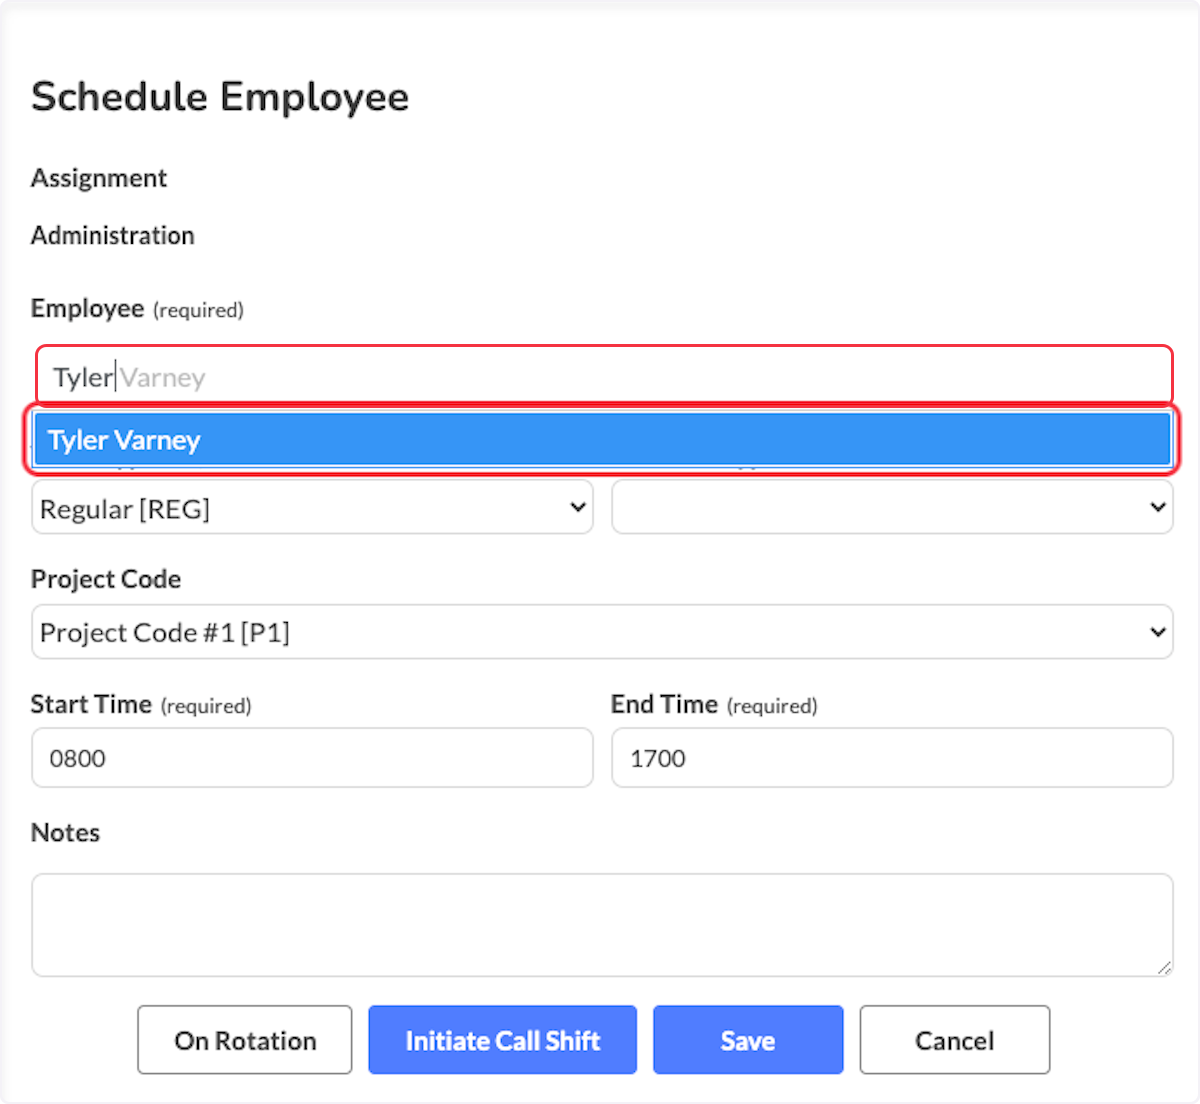 Type in a individuals name in the Employee box and select them when they appear. 